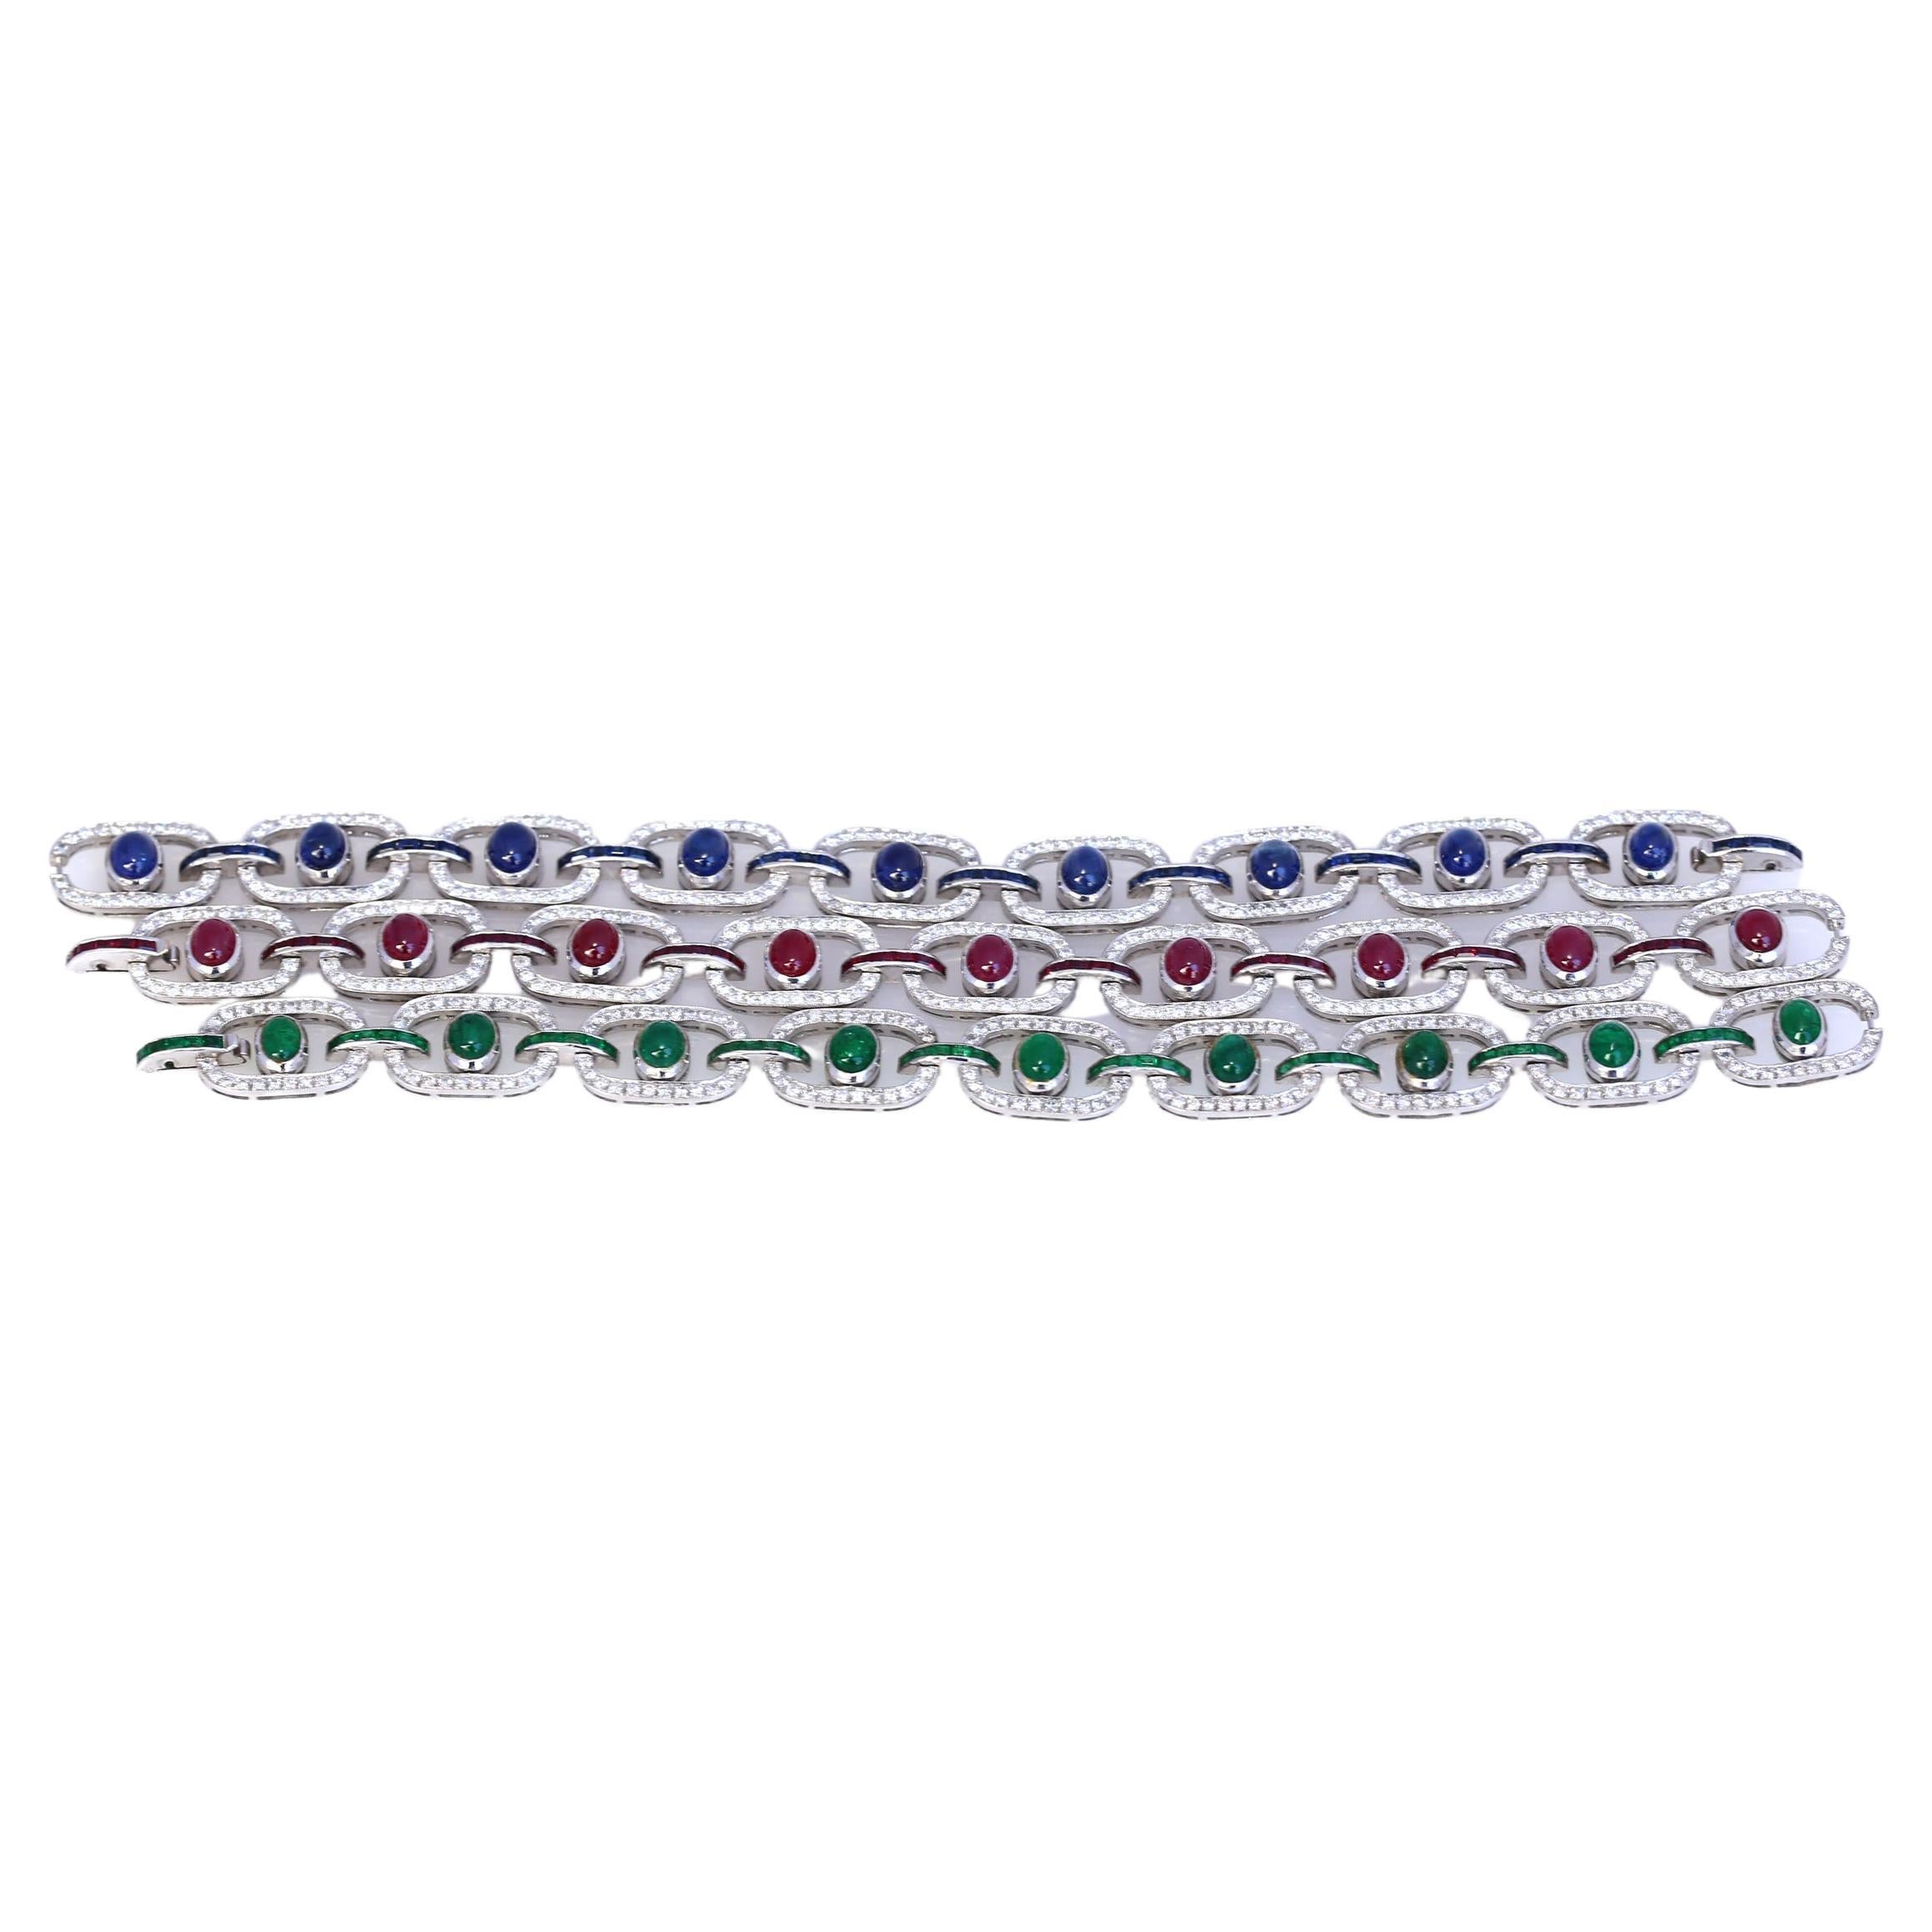 Three bracelets of identical design, decorated with cabochon and calibré-cut Emeralds, Sapphires and Rubies respectively. The fine idea behind the design is that each bracelet can be connected with the other to form a choker or a necklace. All three